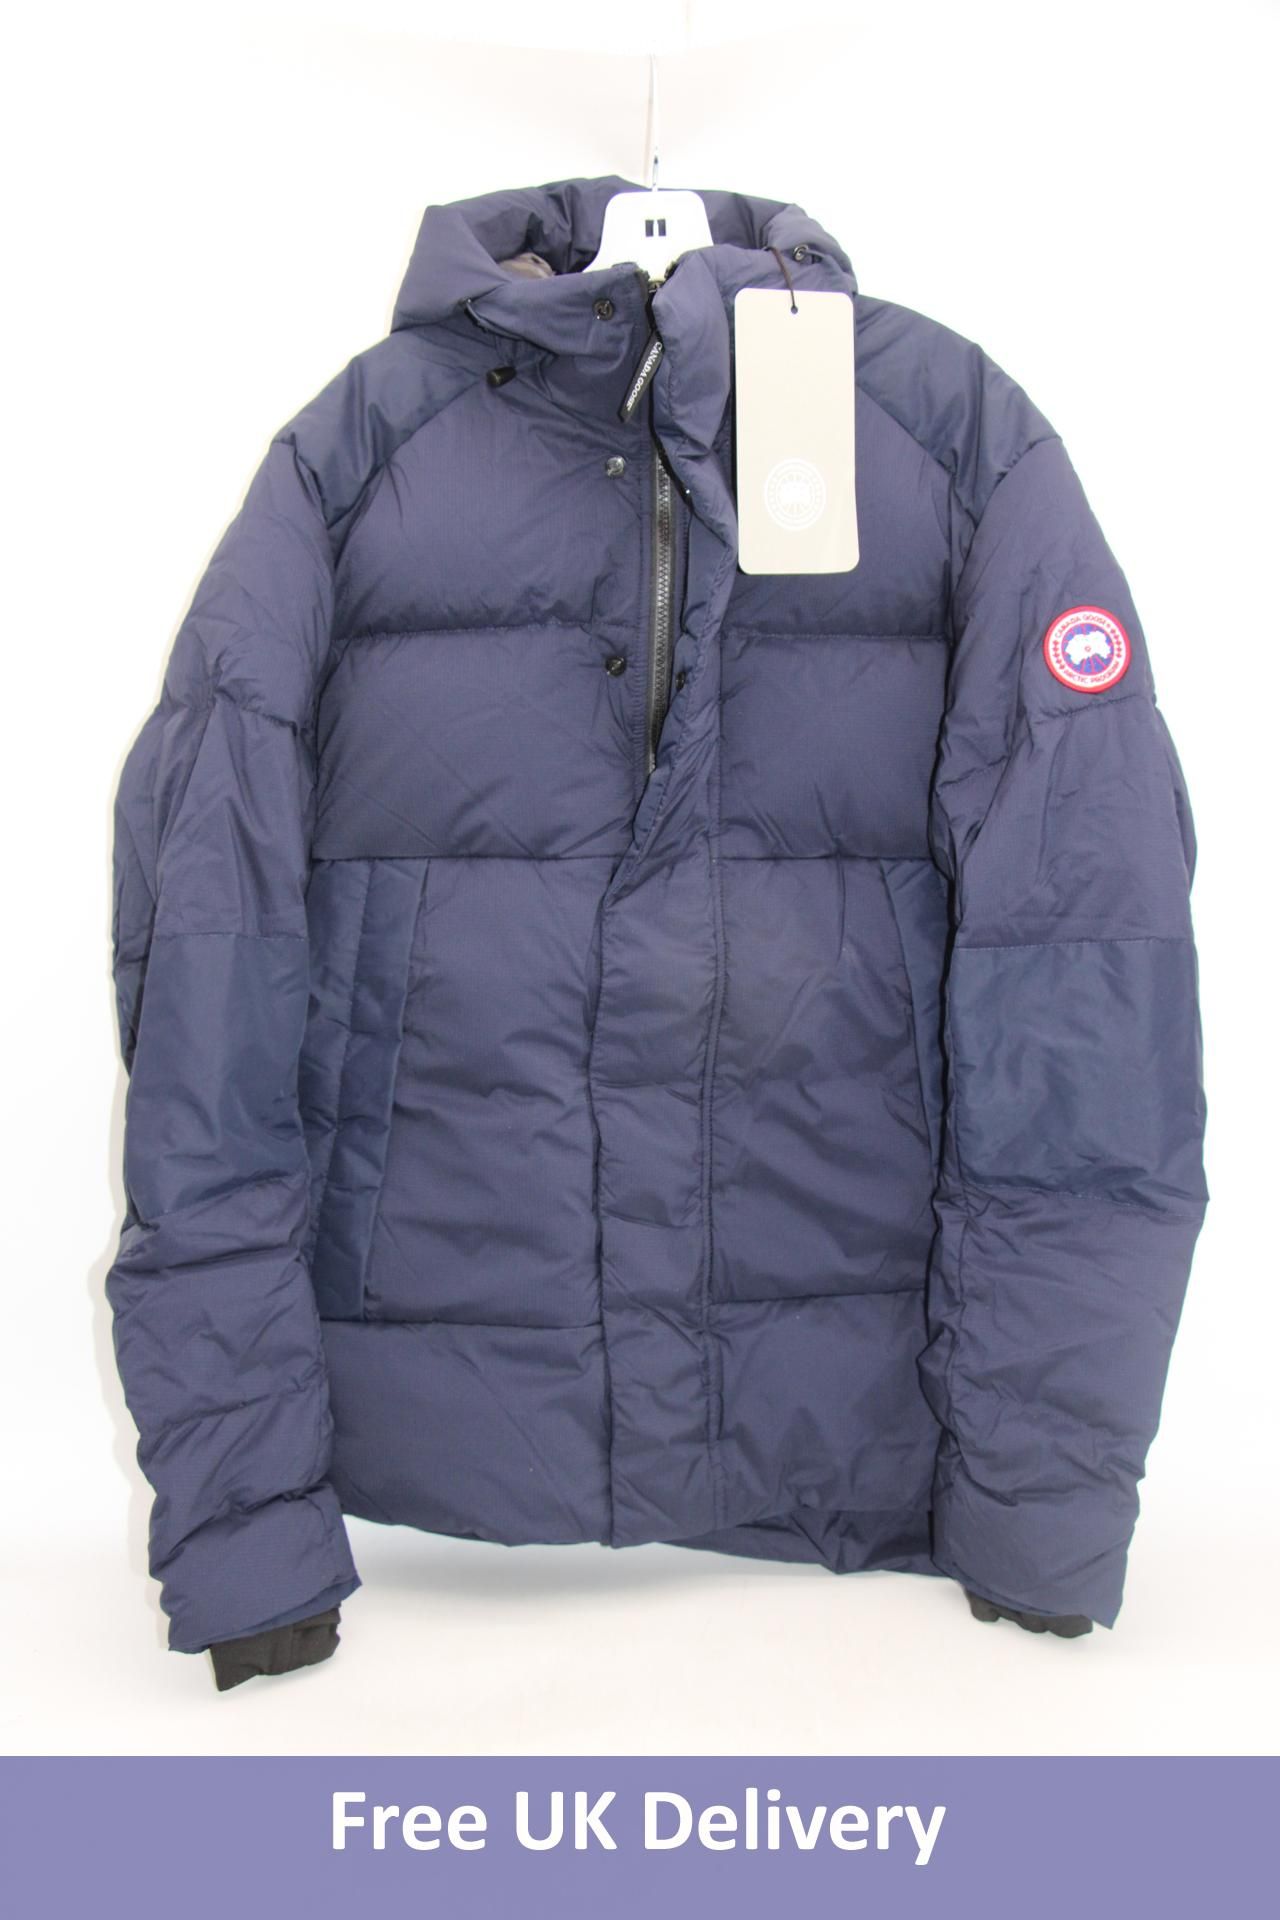 Canada Goose Armstrong Hooded Jacket, Atlantic Navy Blue, Size XL